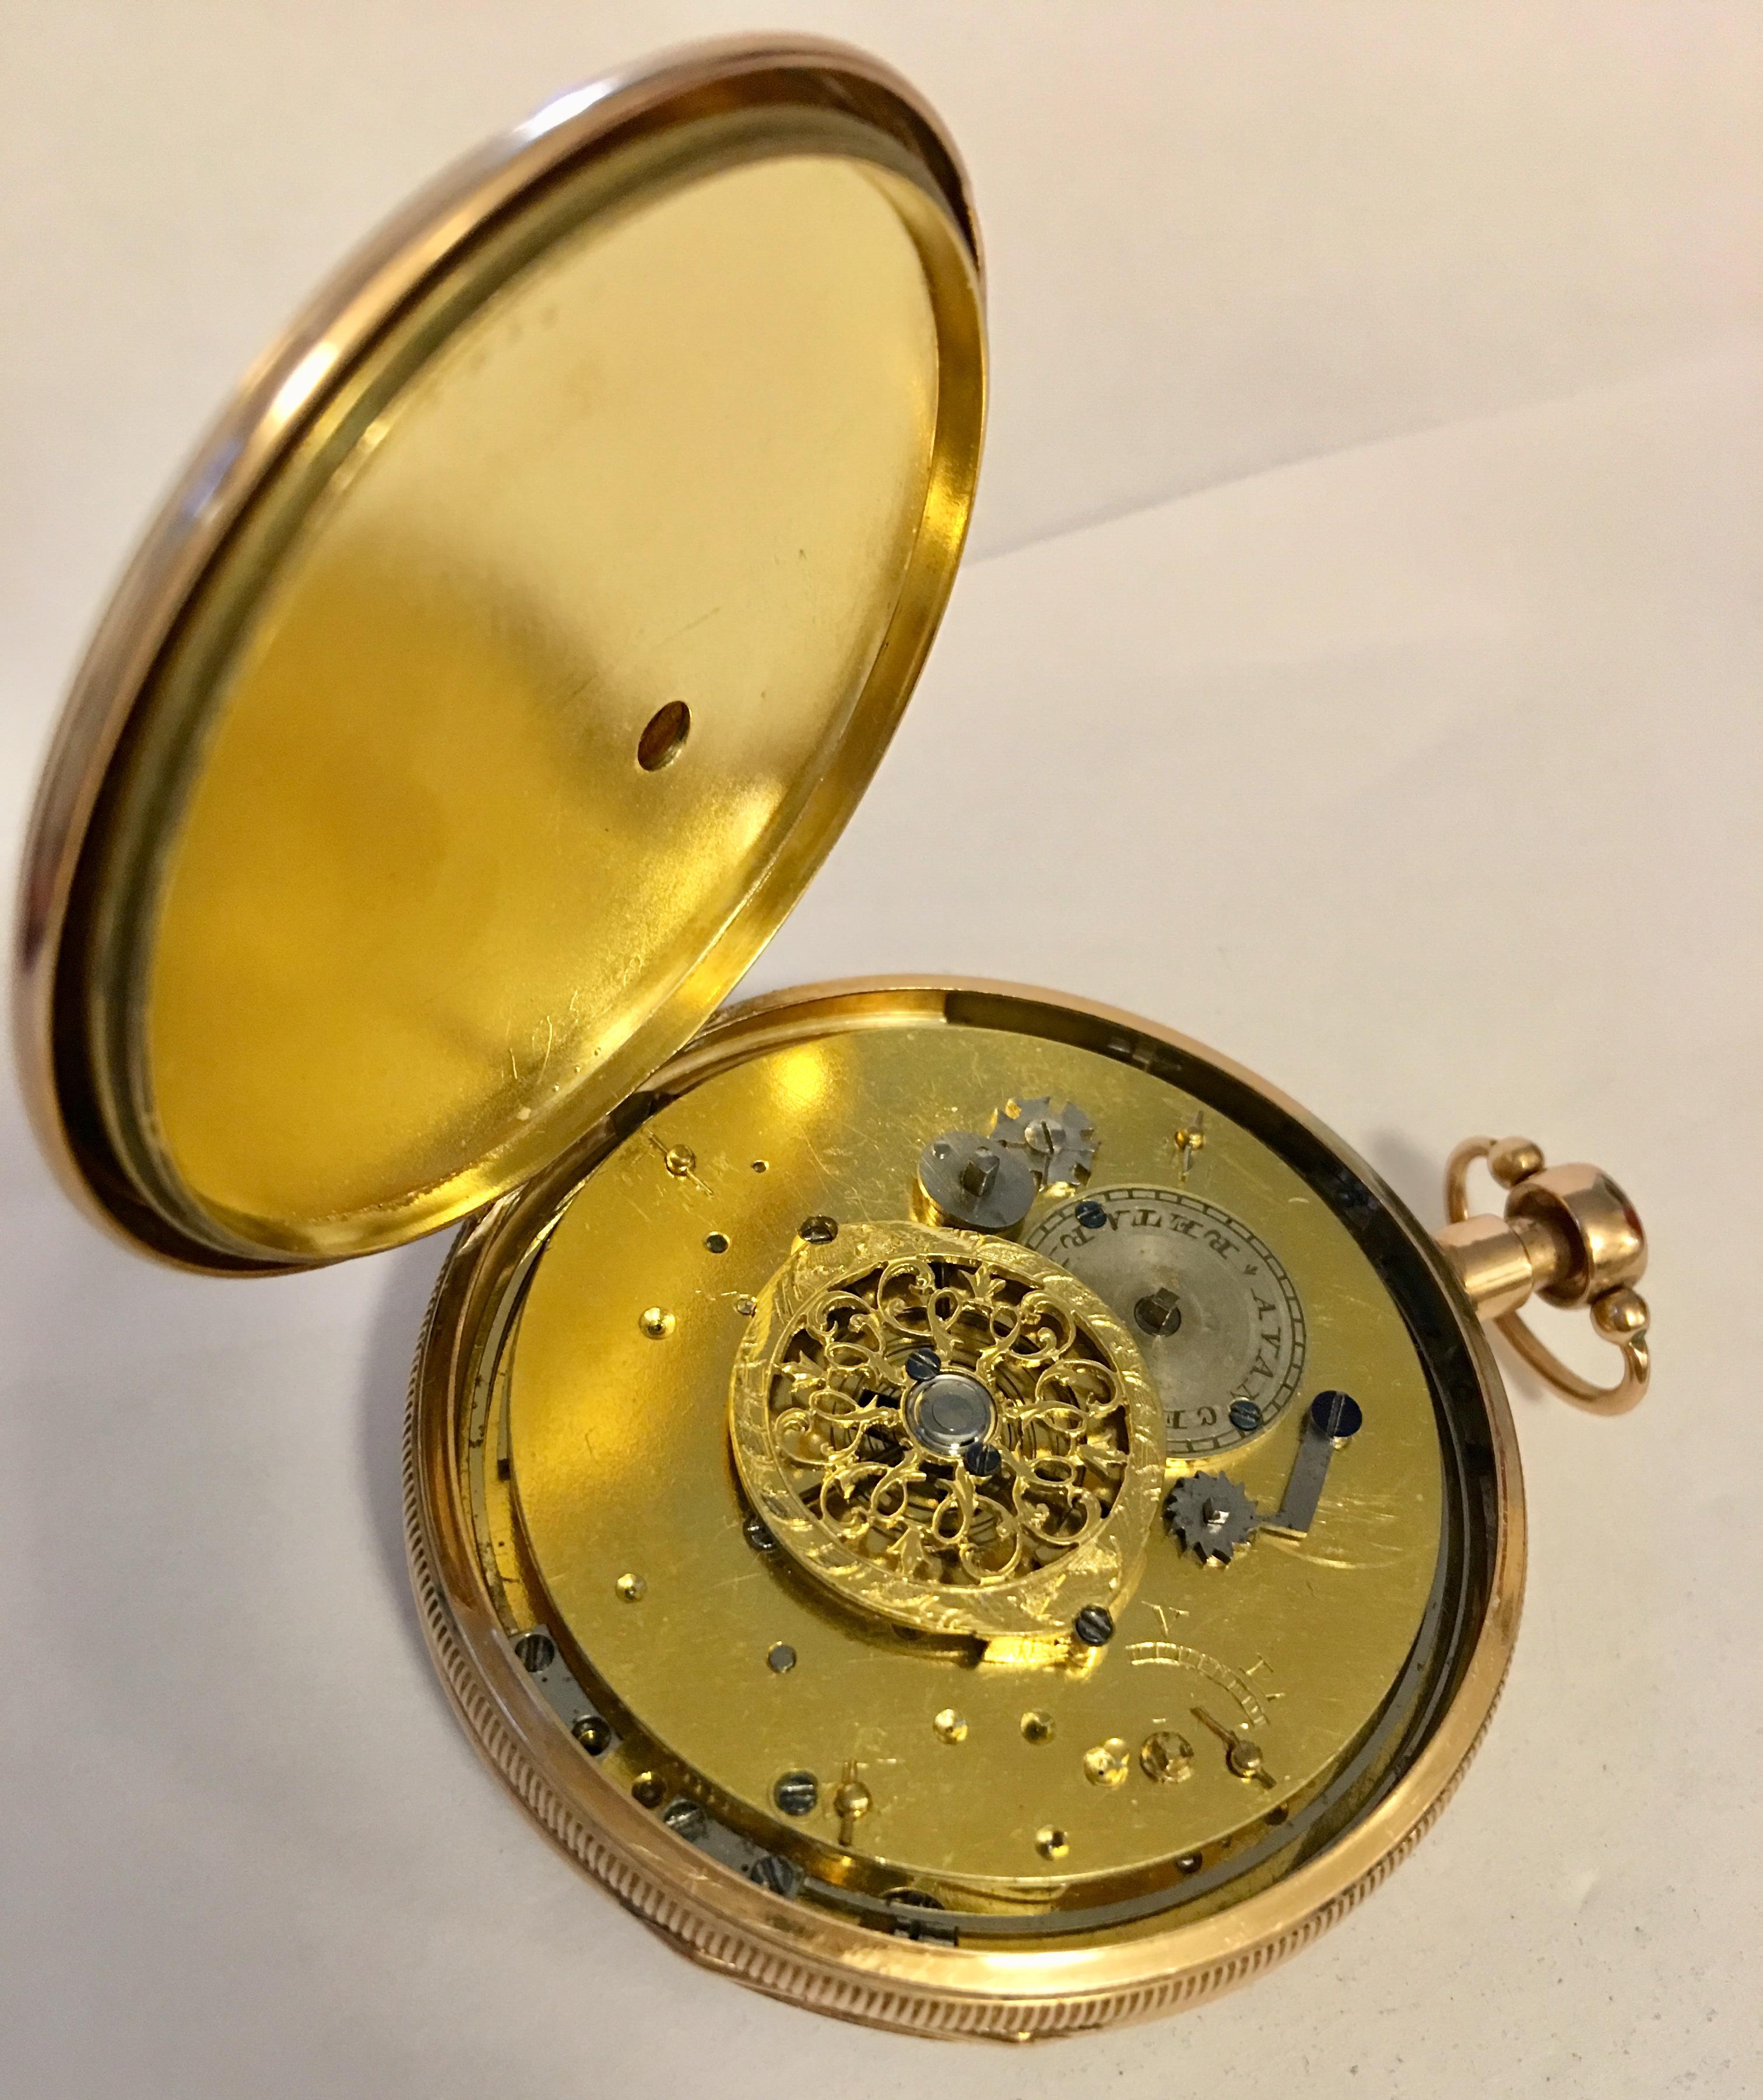 18 Karat Gold Swiss Verge Quarter Repeater Pocket Watch In Good Condition For Sale In Carlisle, GB